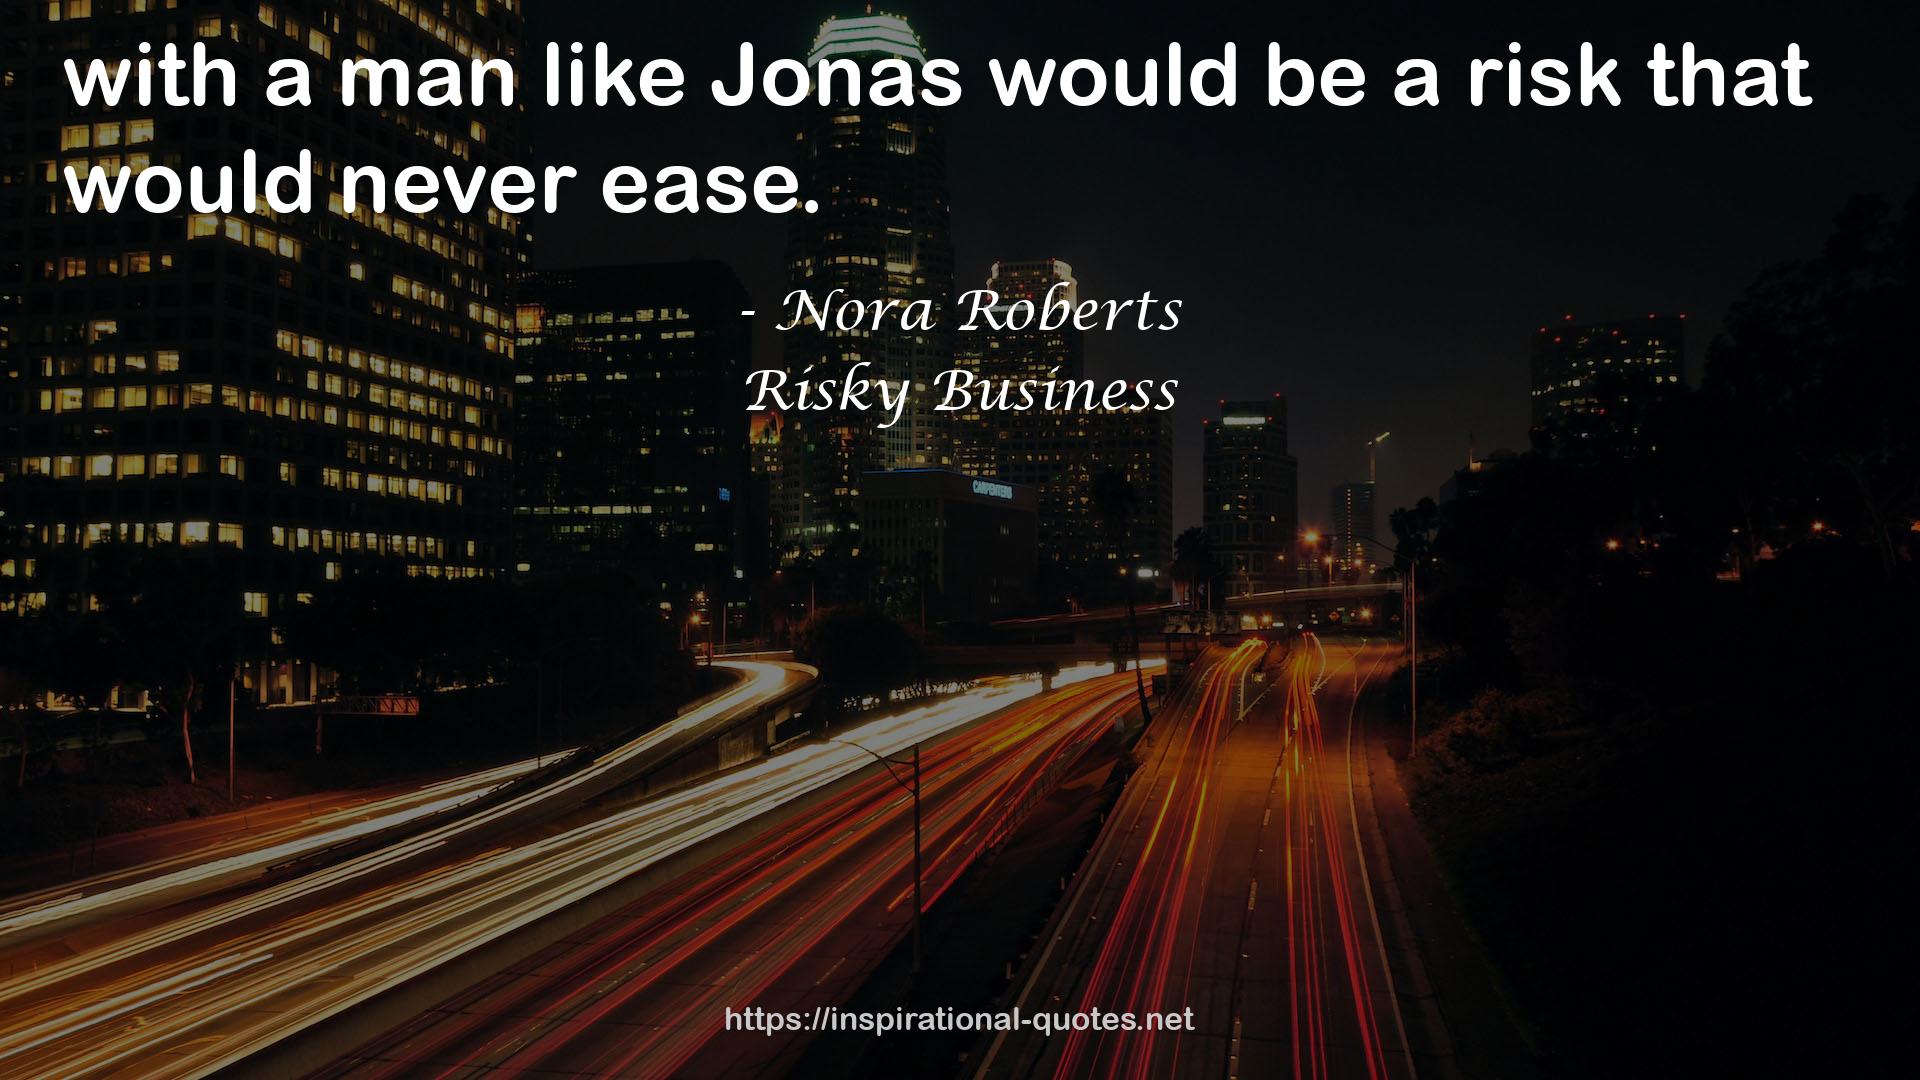 Risky Business QUOTES